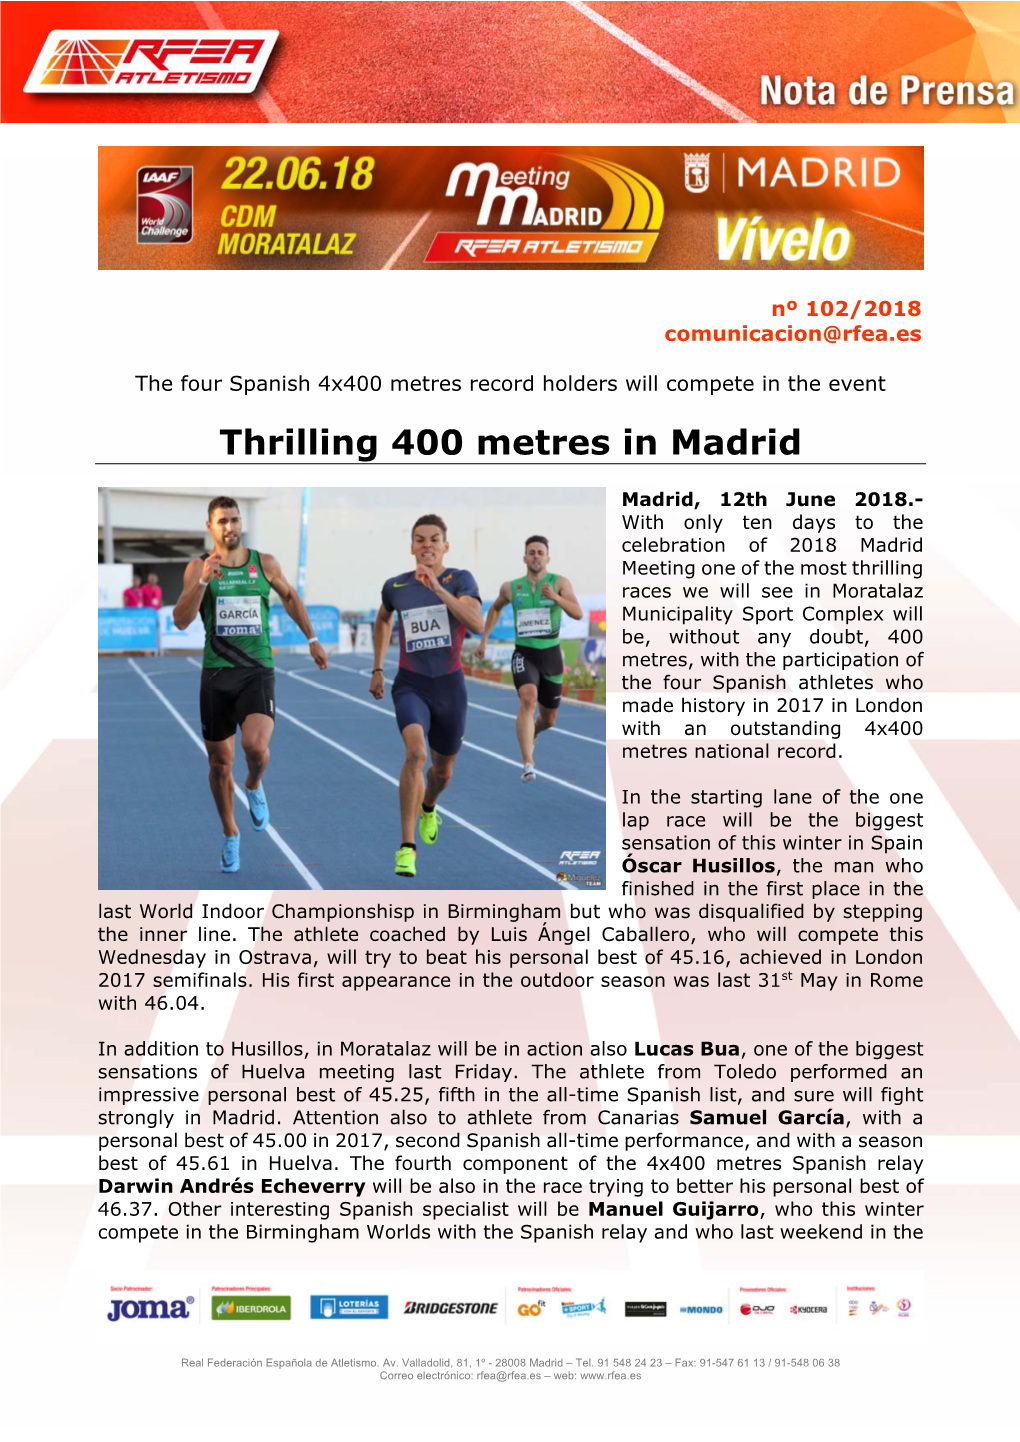 Thrilling 400 Metres in Madrid